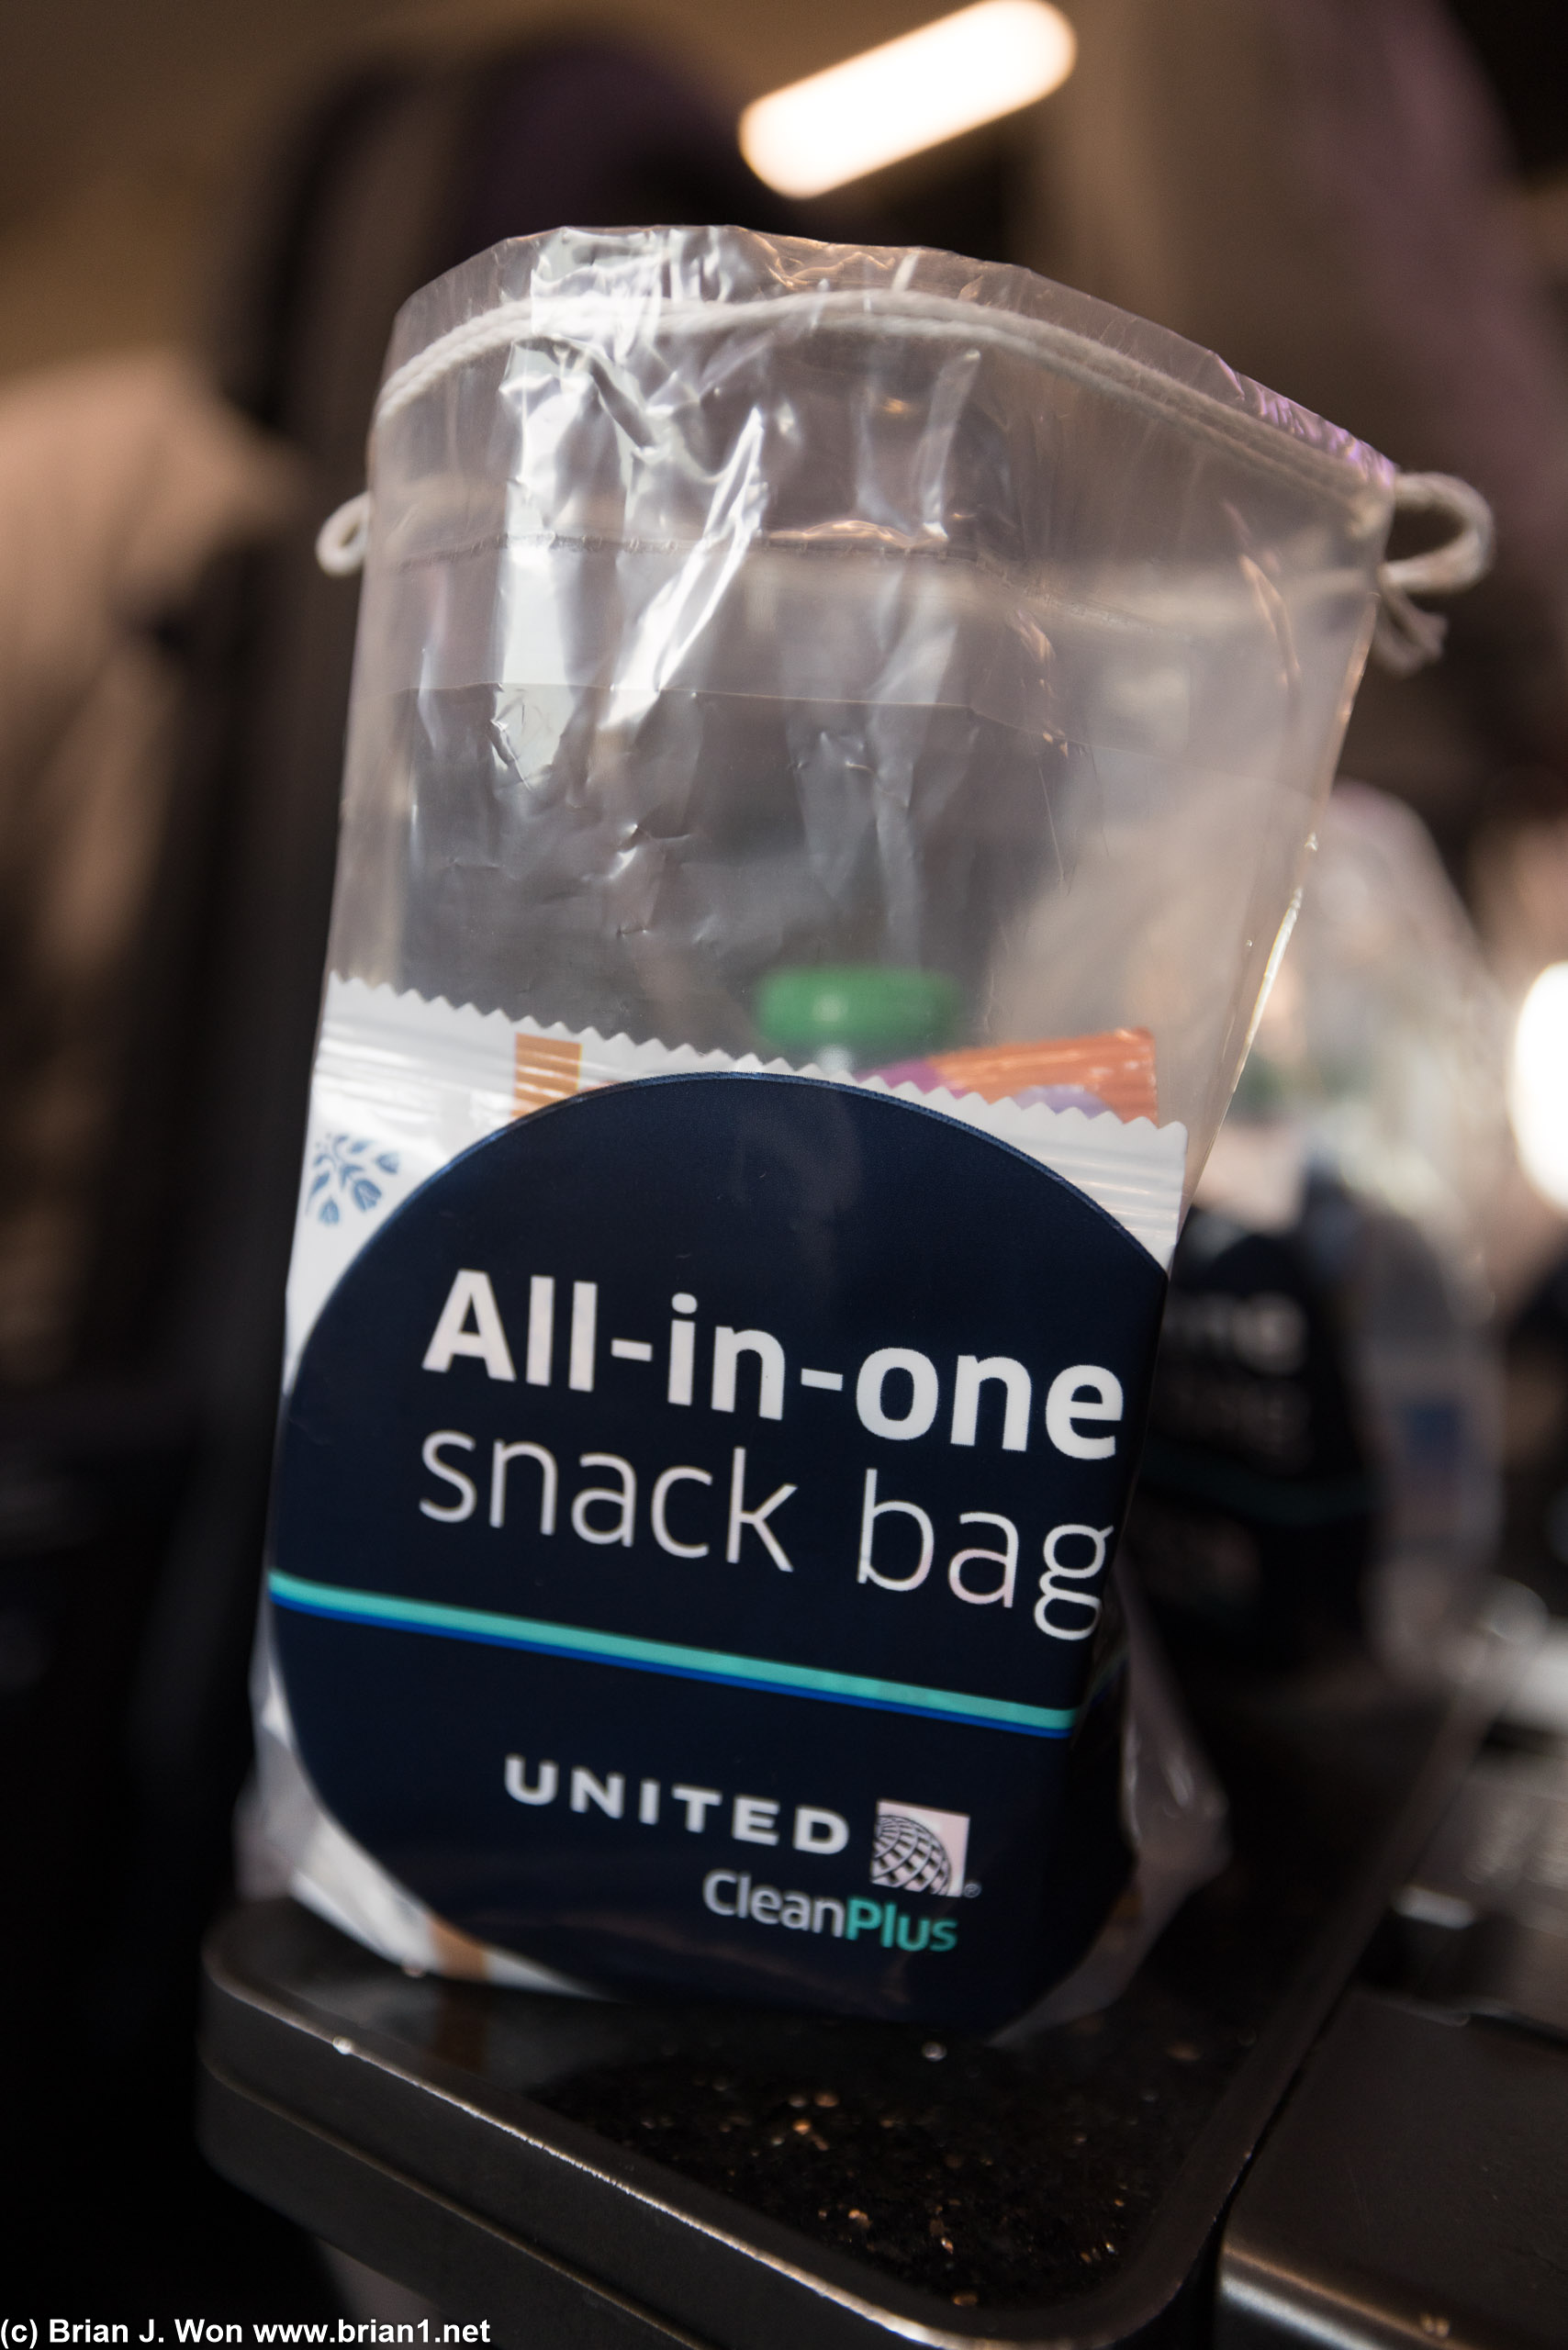 The all-in-one snack bag still lives.